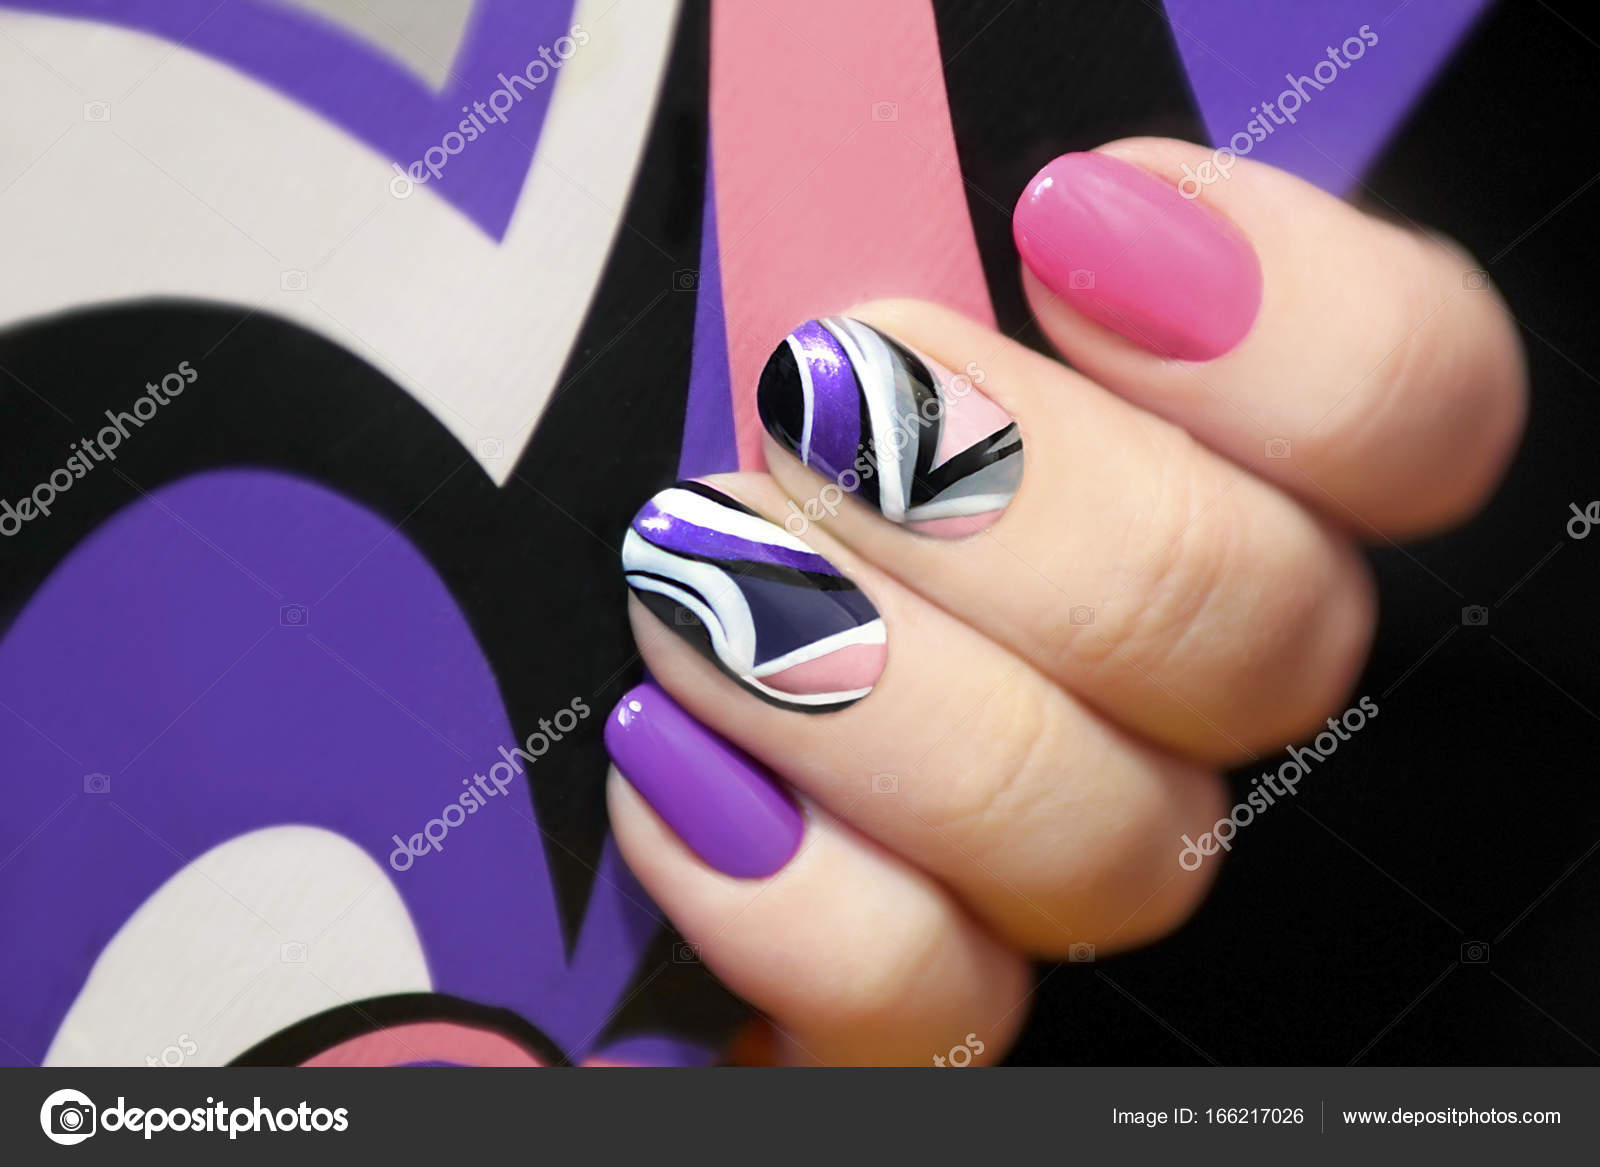 White with Purple & Gold Hearts Nail Wraps